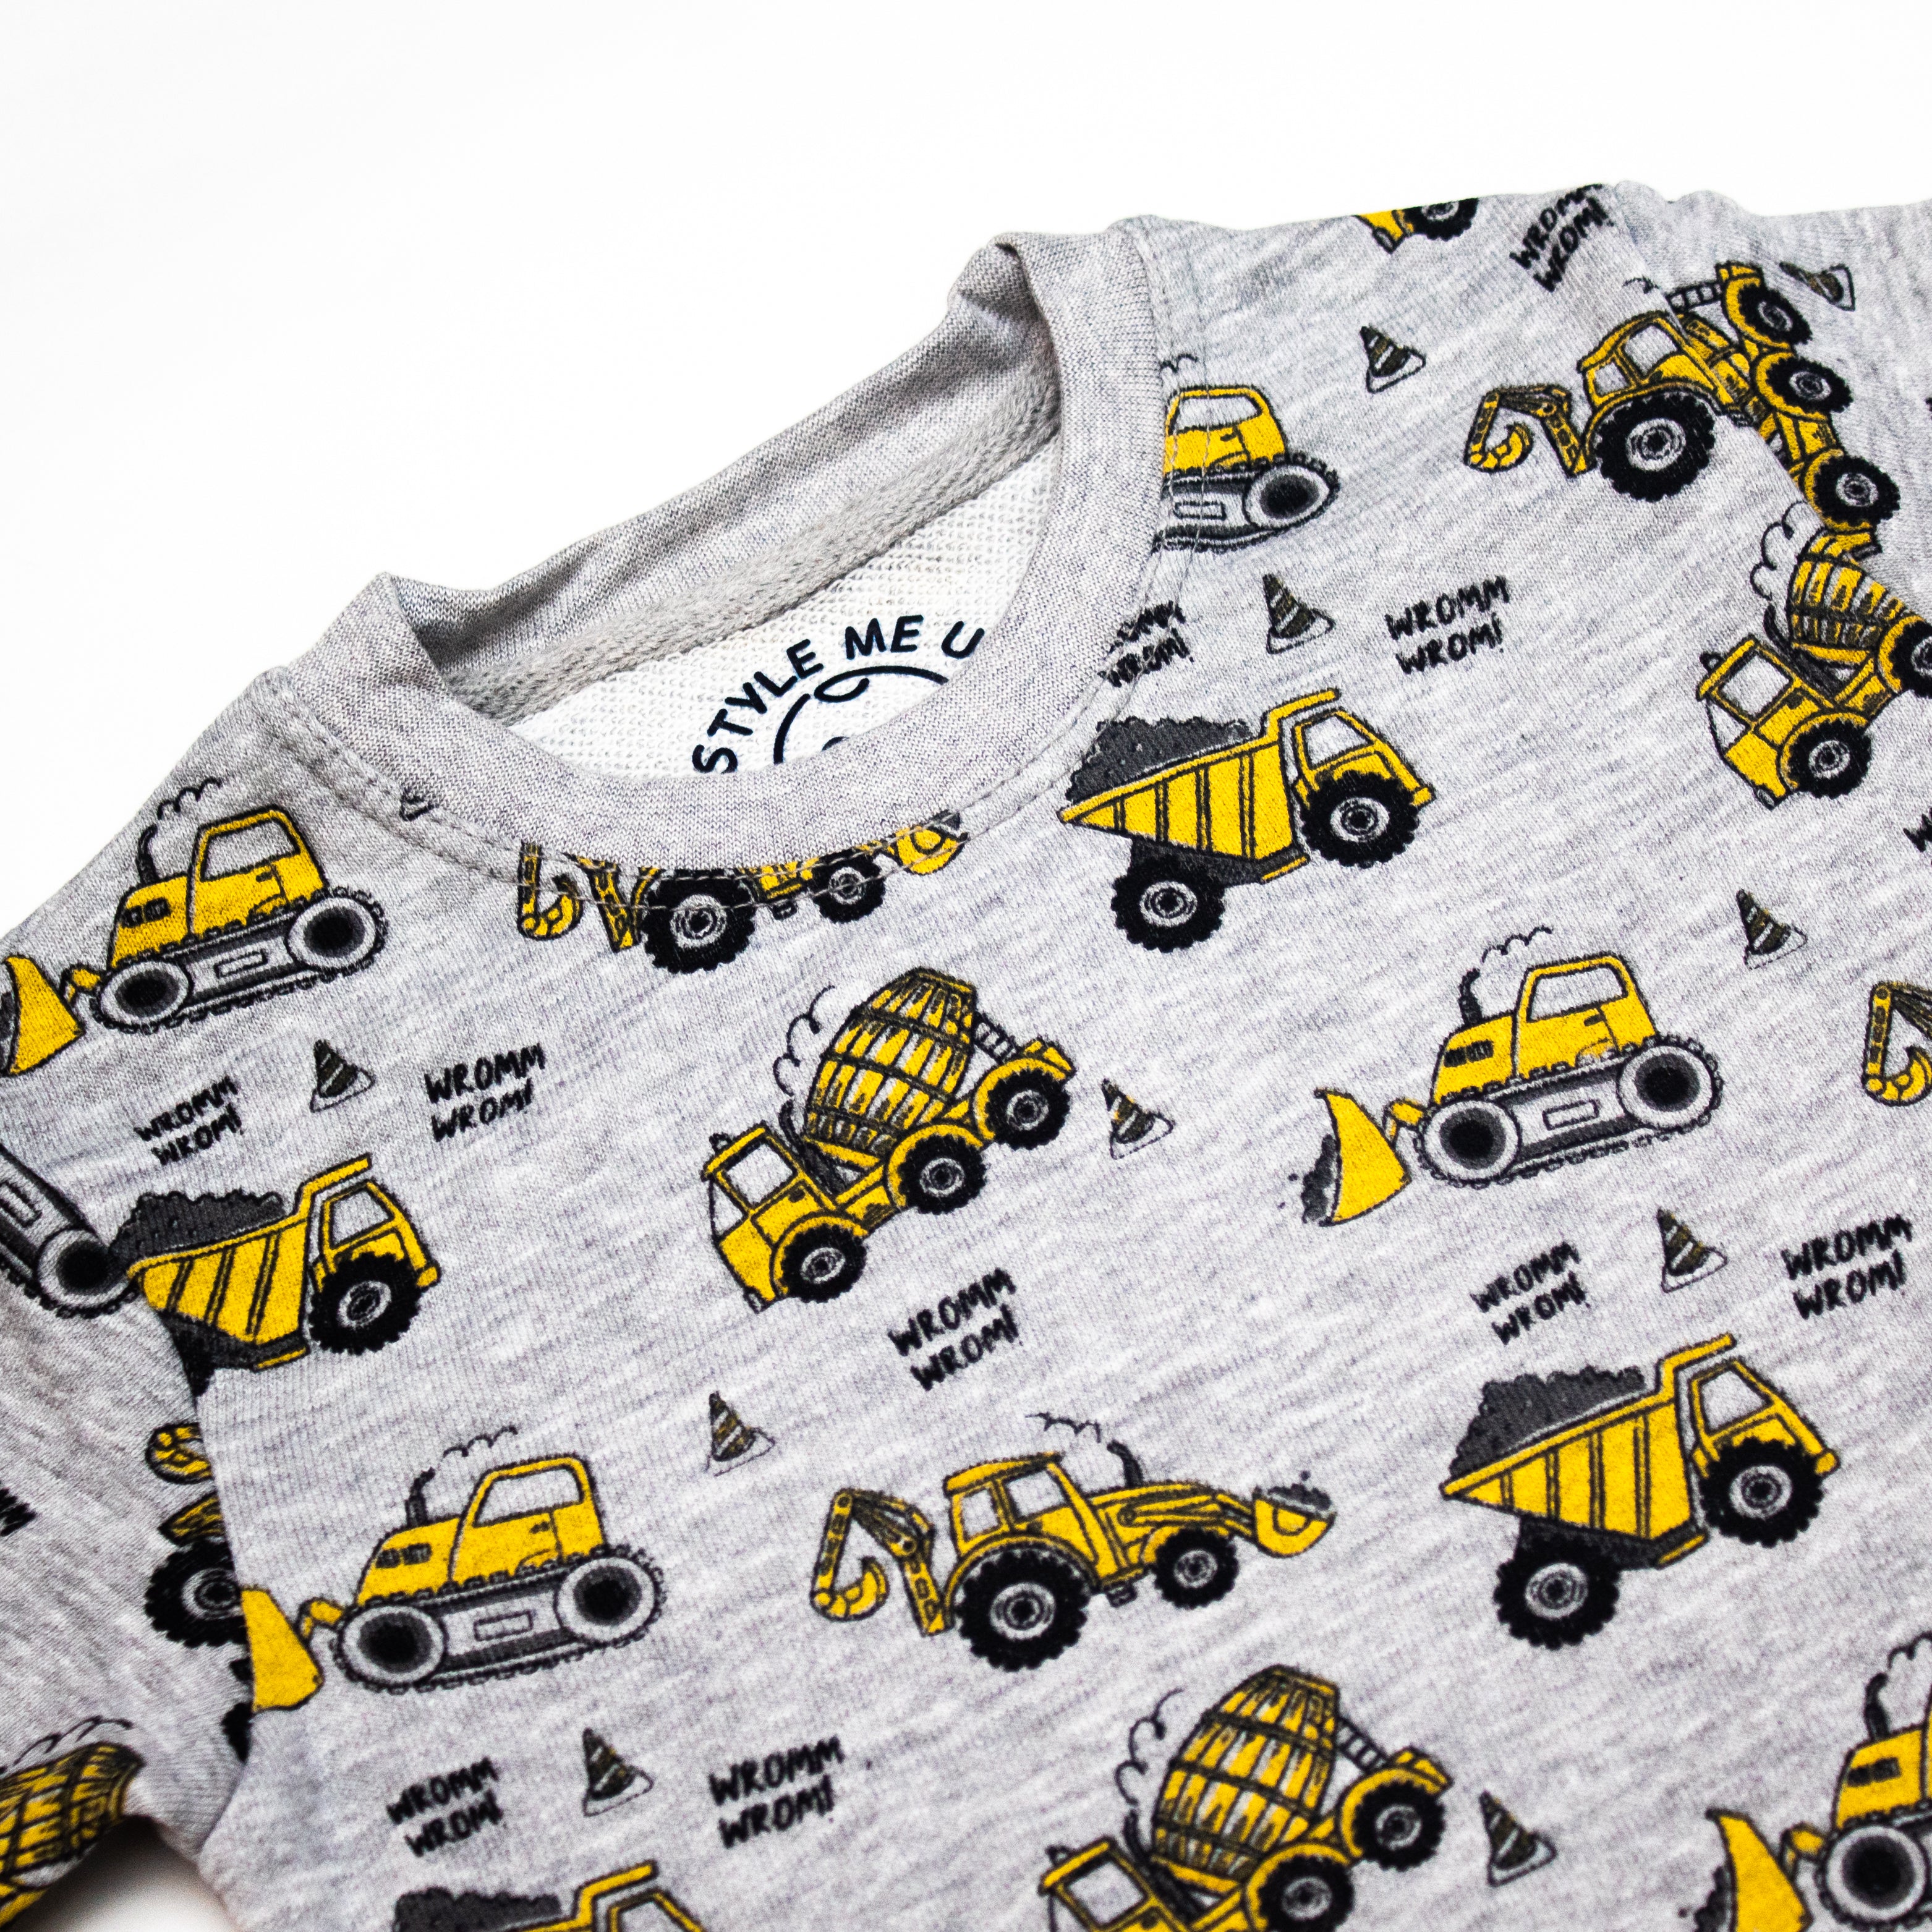 Grey Boys Truck T-Shirt And Shorts For Kids